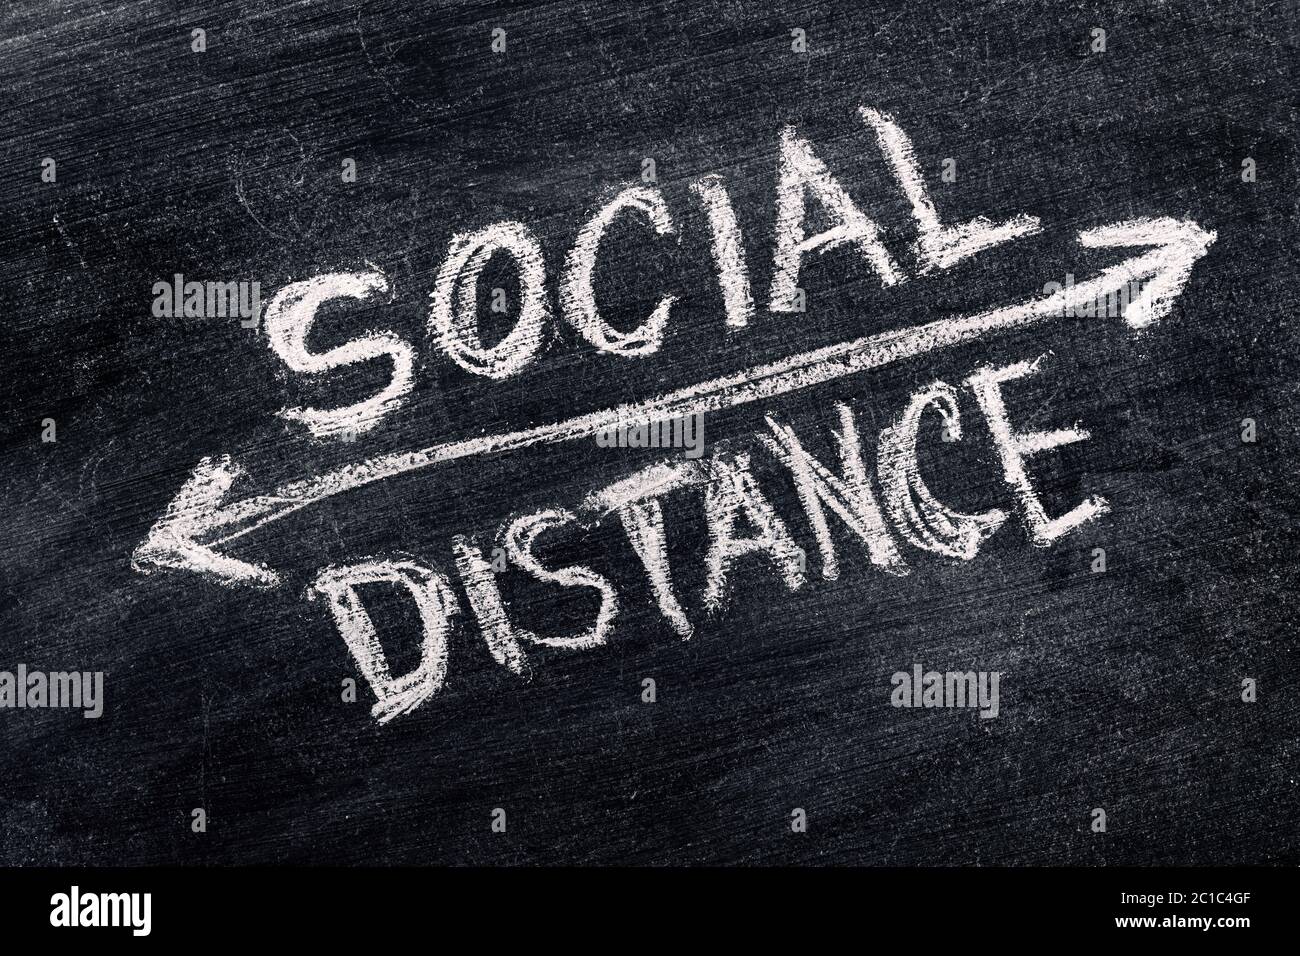 Social distance written in chalk on blackboard, conceptual image referring to distance between different society groups Stock Photo